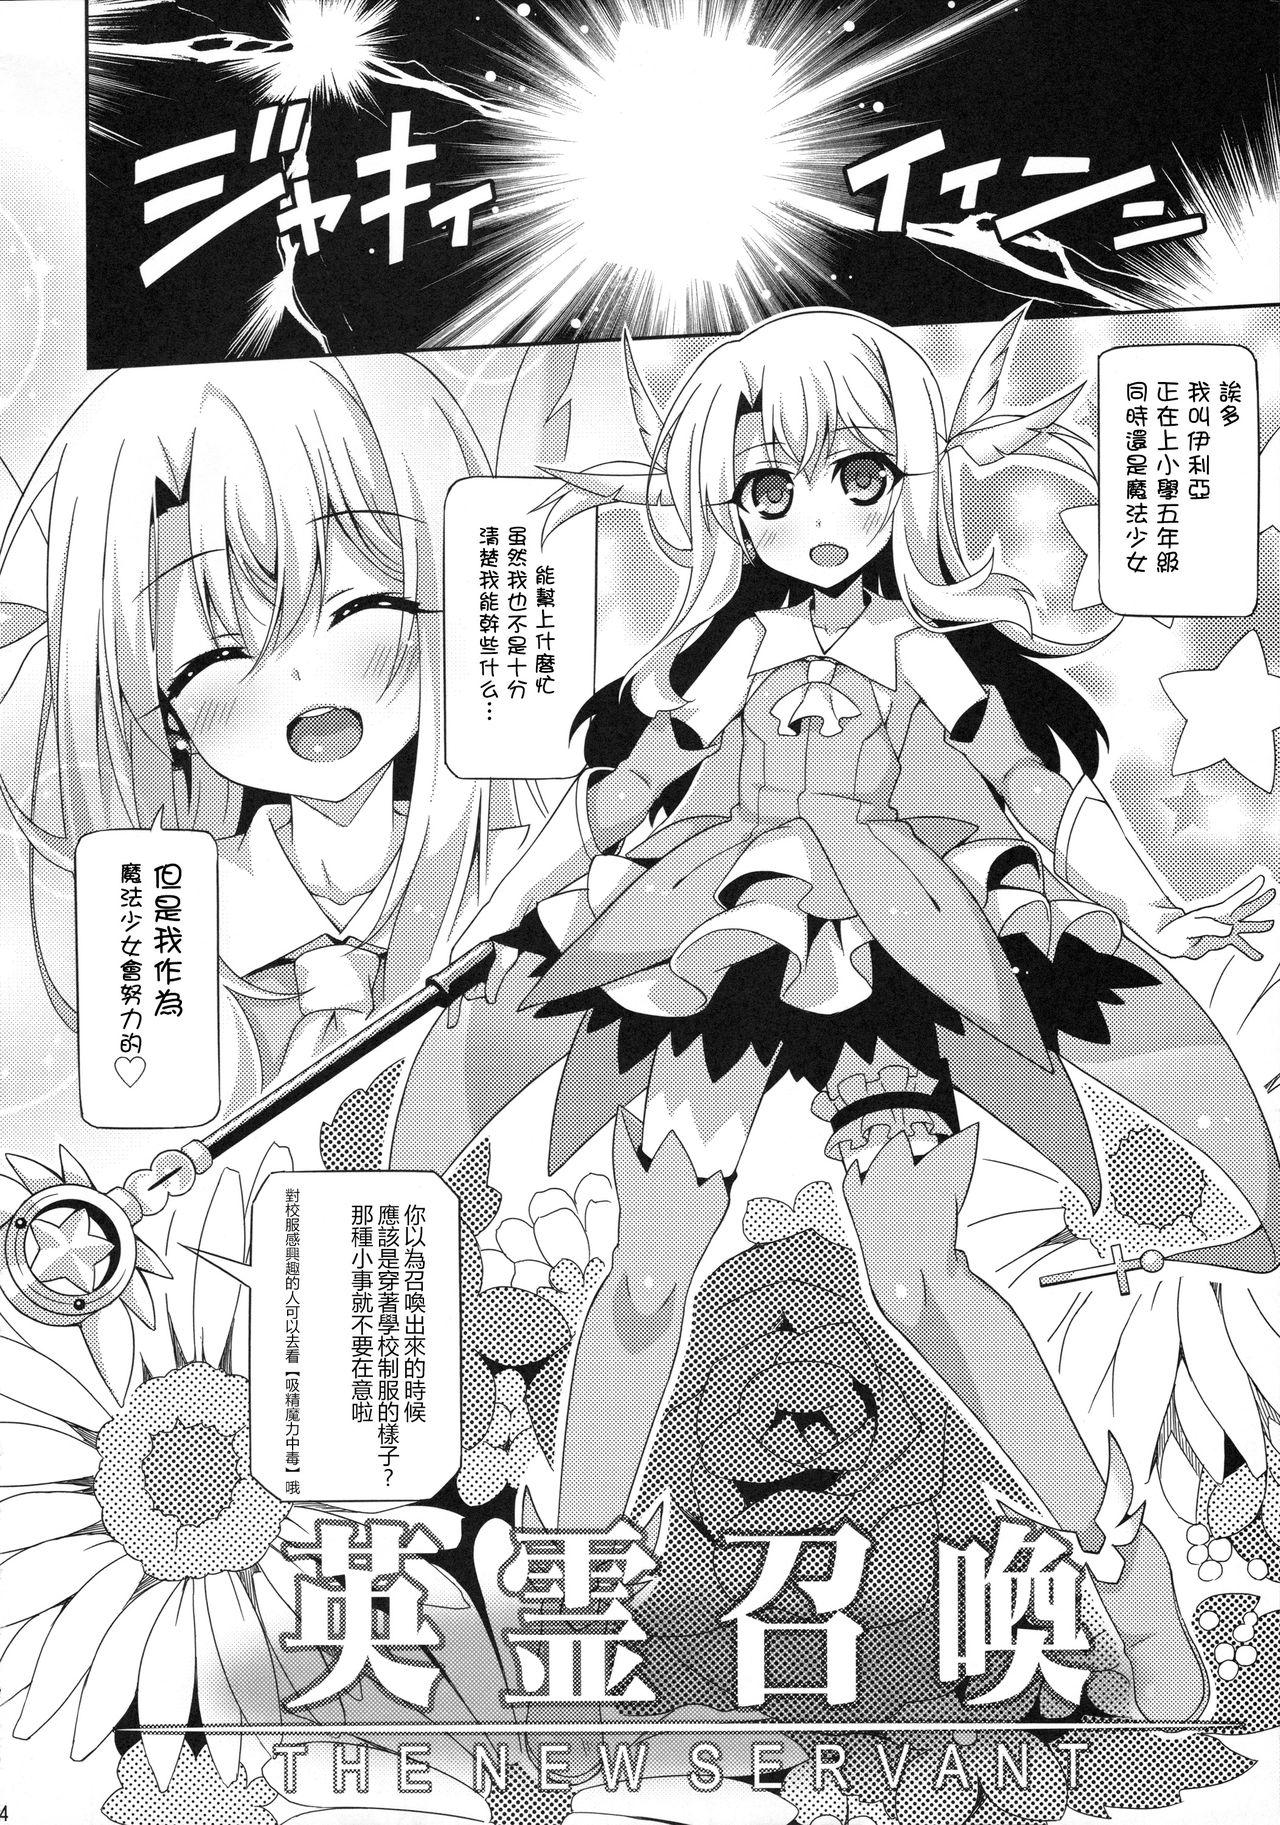 Cunt Illya-chan to Love Love Reijyux - Fate grand order Fate kaleid liner prisma illya Gozada - Page 8